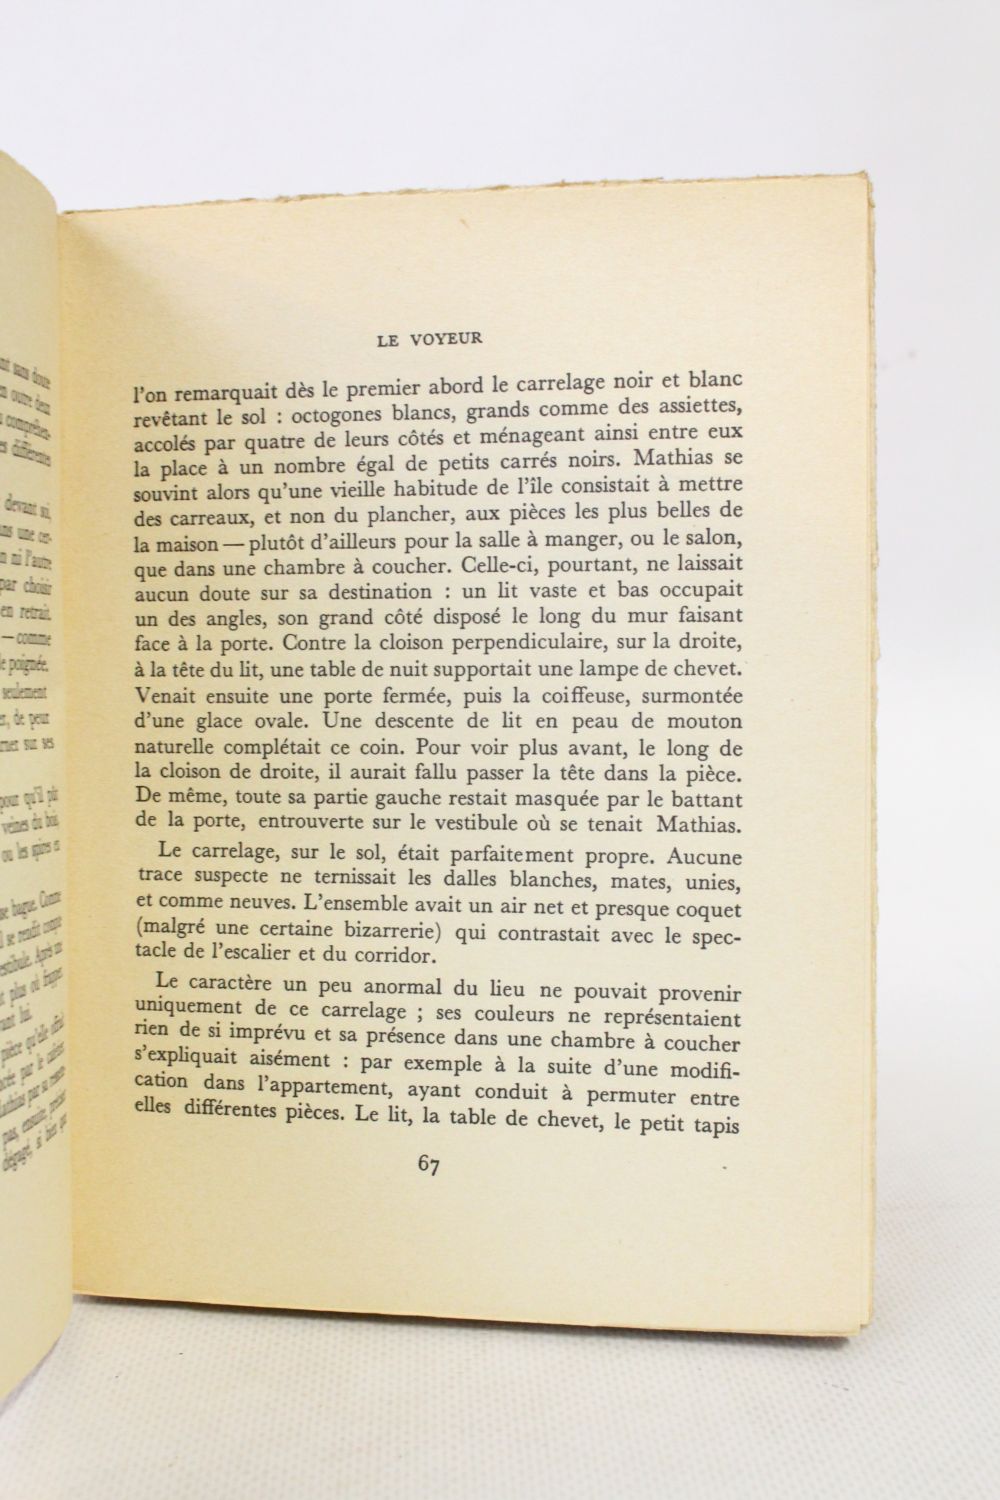 ROBBE-GRILLET Le voyeur - Signed book, First edition image